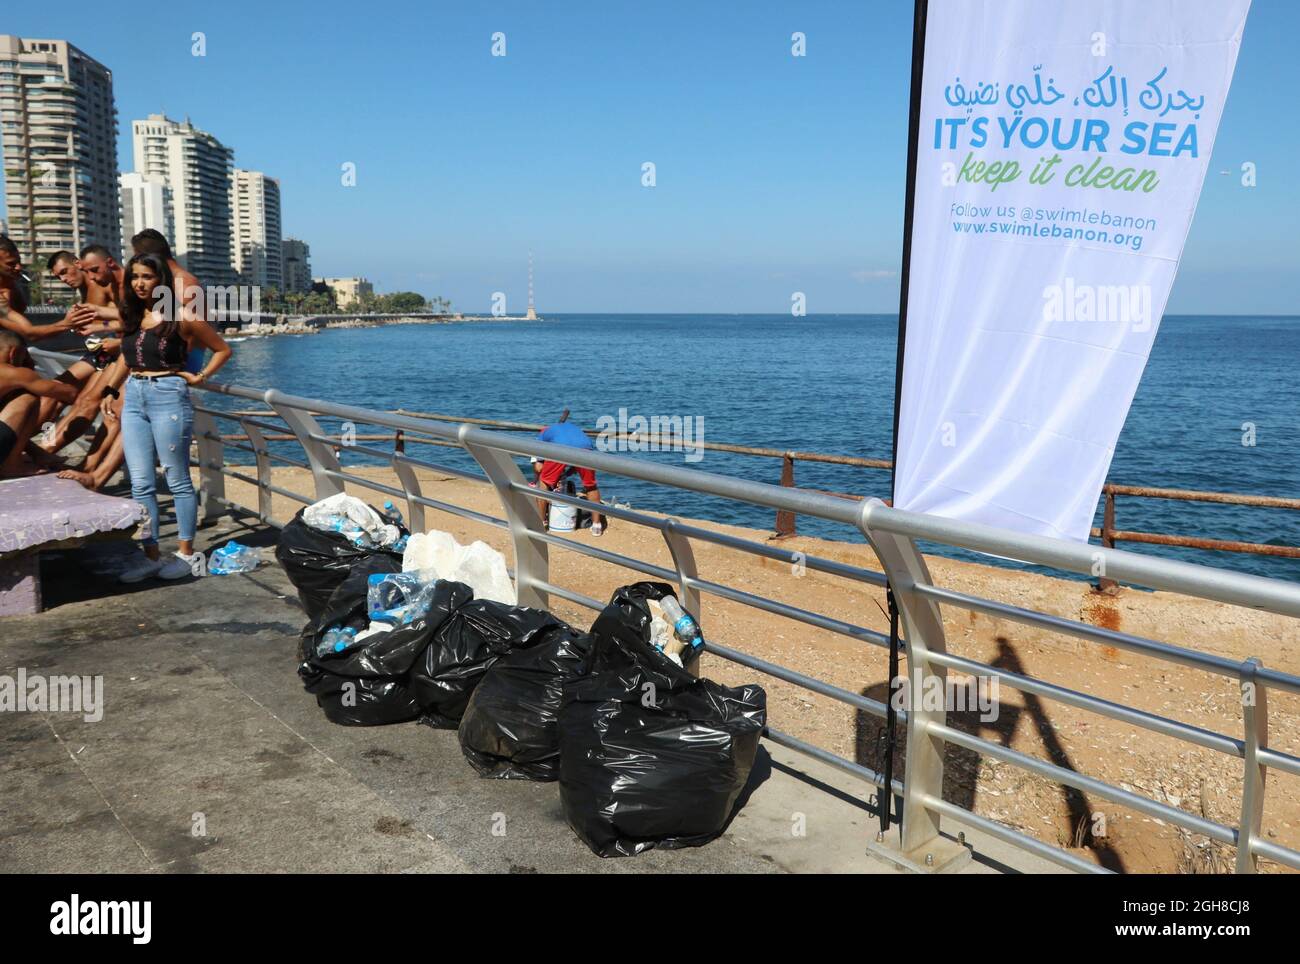 Volunteers pick up garbage in Beirut, Lebanon, September 5, 2021, according the slogan 'It's your sea, keep it safe'. In the midst of a momentous economic, financial and social crisis, Lebanon is risking an ecological meltdown too. Due to lack of fuel, in many areas of the Country waste collection has been halted. Sea and shores in Beirut and its surrounding are heavily polluted. (Elisa Gestri/Sipa USA) Stock Photo